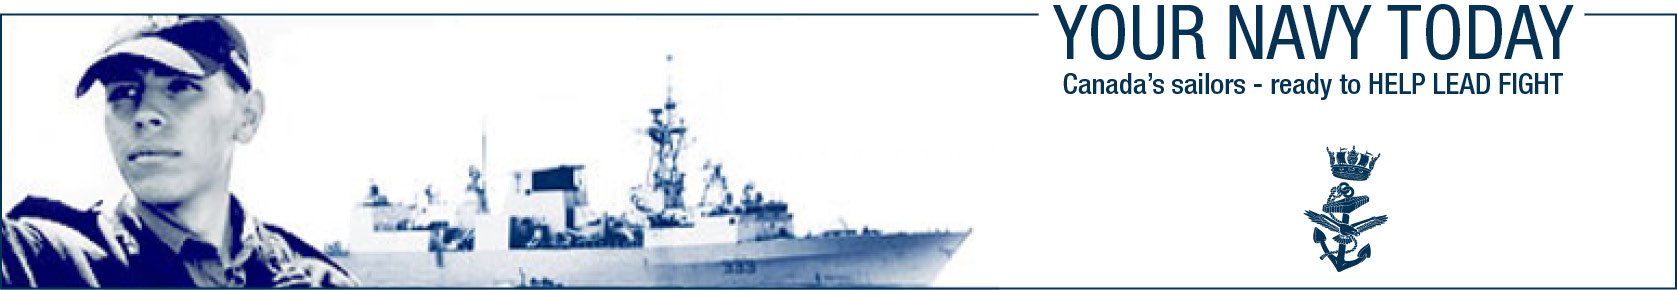 Your Navy Today banner